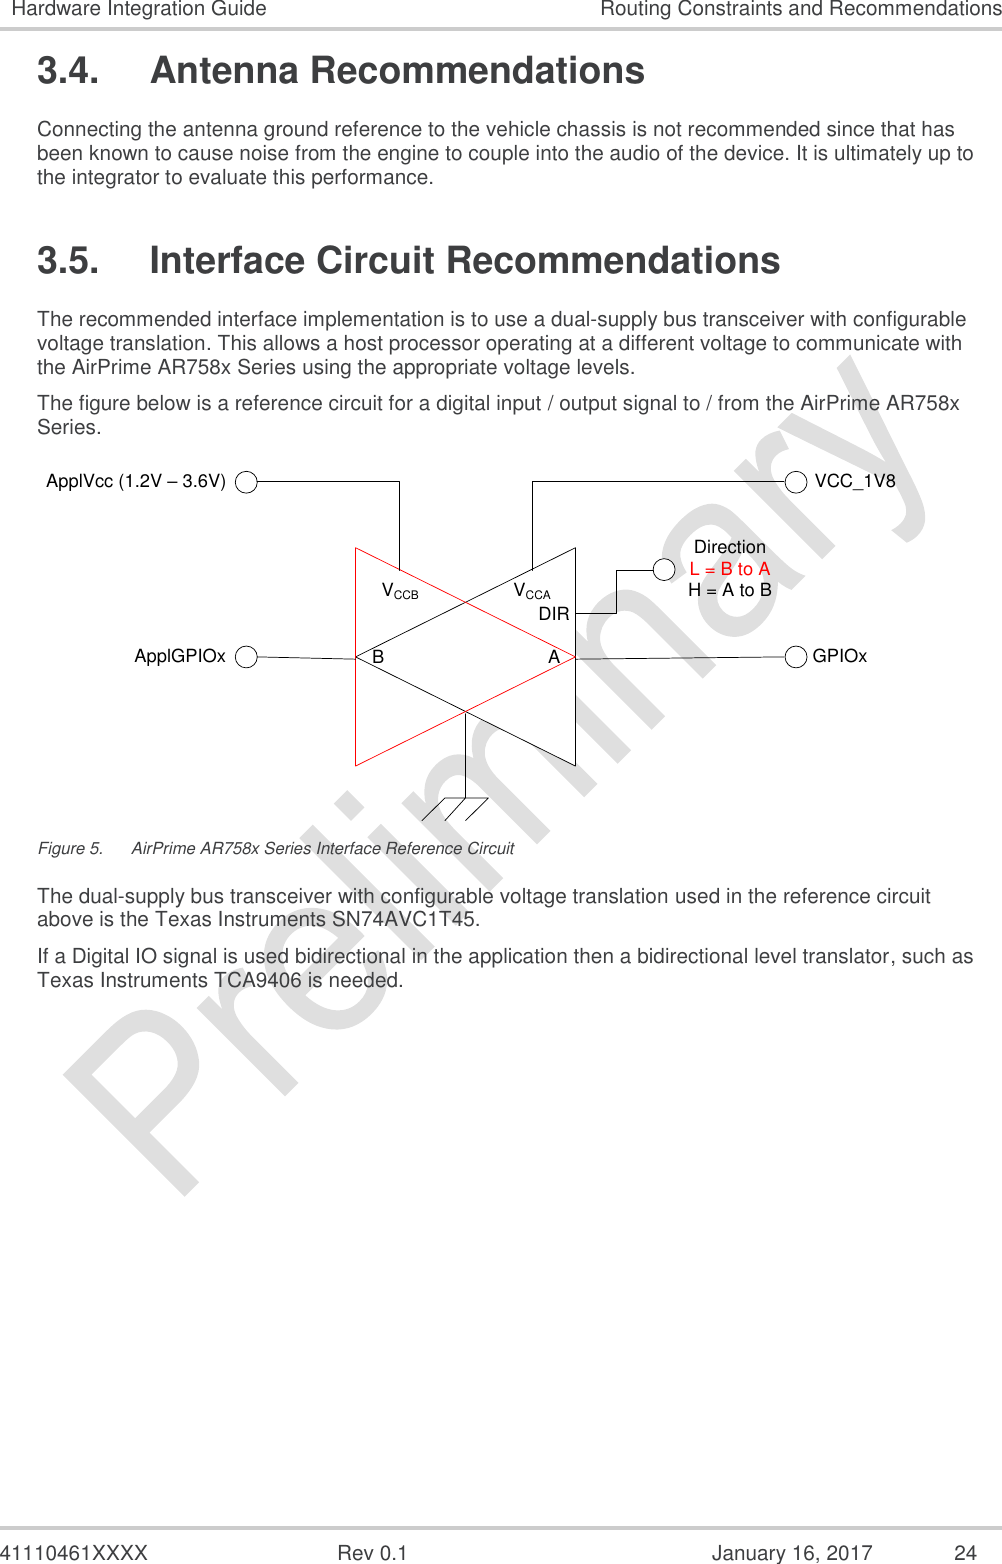  41110461XXXX  Rev 0.1  January 16, 2017  24 Hardware Integration Guide Routing Constraints and Recommendations 3.4.  Antenna Recommendations Connecting the antenna ground reference to the vehicle chassis is not recommended since that has been known to cause noise from the engine to couple into the audio of the device. It is ultimately up to the integrator to evaluate this performance. 3.5.  Interface Circuit Recommendations The recommended interface implementation is to use a dual-supply bus transceiver with configurable voltage translation. This allows a host processor operating at a different voltage to communicate with the AirPrime AR758x Series using the appropriate voltage levels. The figure below is a reference circuit for a digital input / output signal to / from the AirPrime AR758x Series. VCCAVCCB DIRAB GPIOxVCC_1V8ApplVcc (1.2V – 3.6V)ApplGPIOxDirectionL = B to AH = A to B Figure 5.  AirPrime AR758x Series Interface Reference Circuit The dual-supply bus transceiver with configurable voltage translation used in the reference circuit above is the Texas Instruments SN74AVC1T45. If a Digital IO signal is used bidirectional in the application then a bidirectional level translator, such as Texas Instruments TCA9406 is needed. 